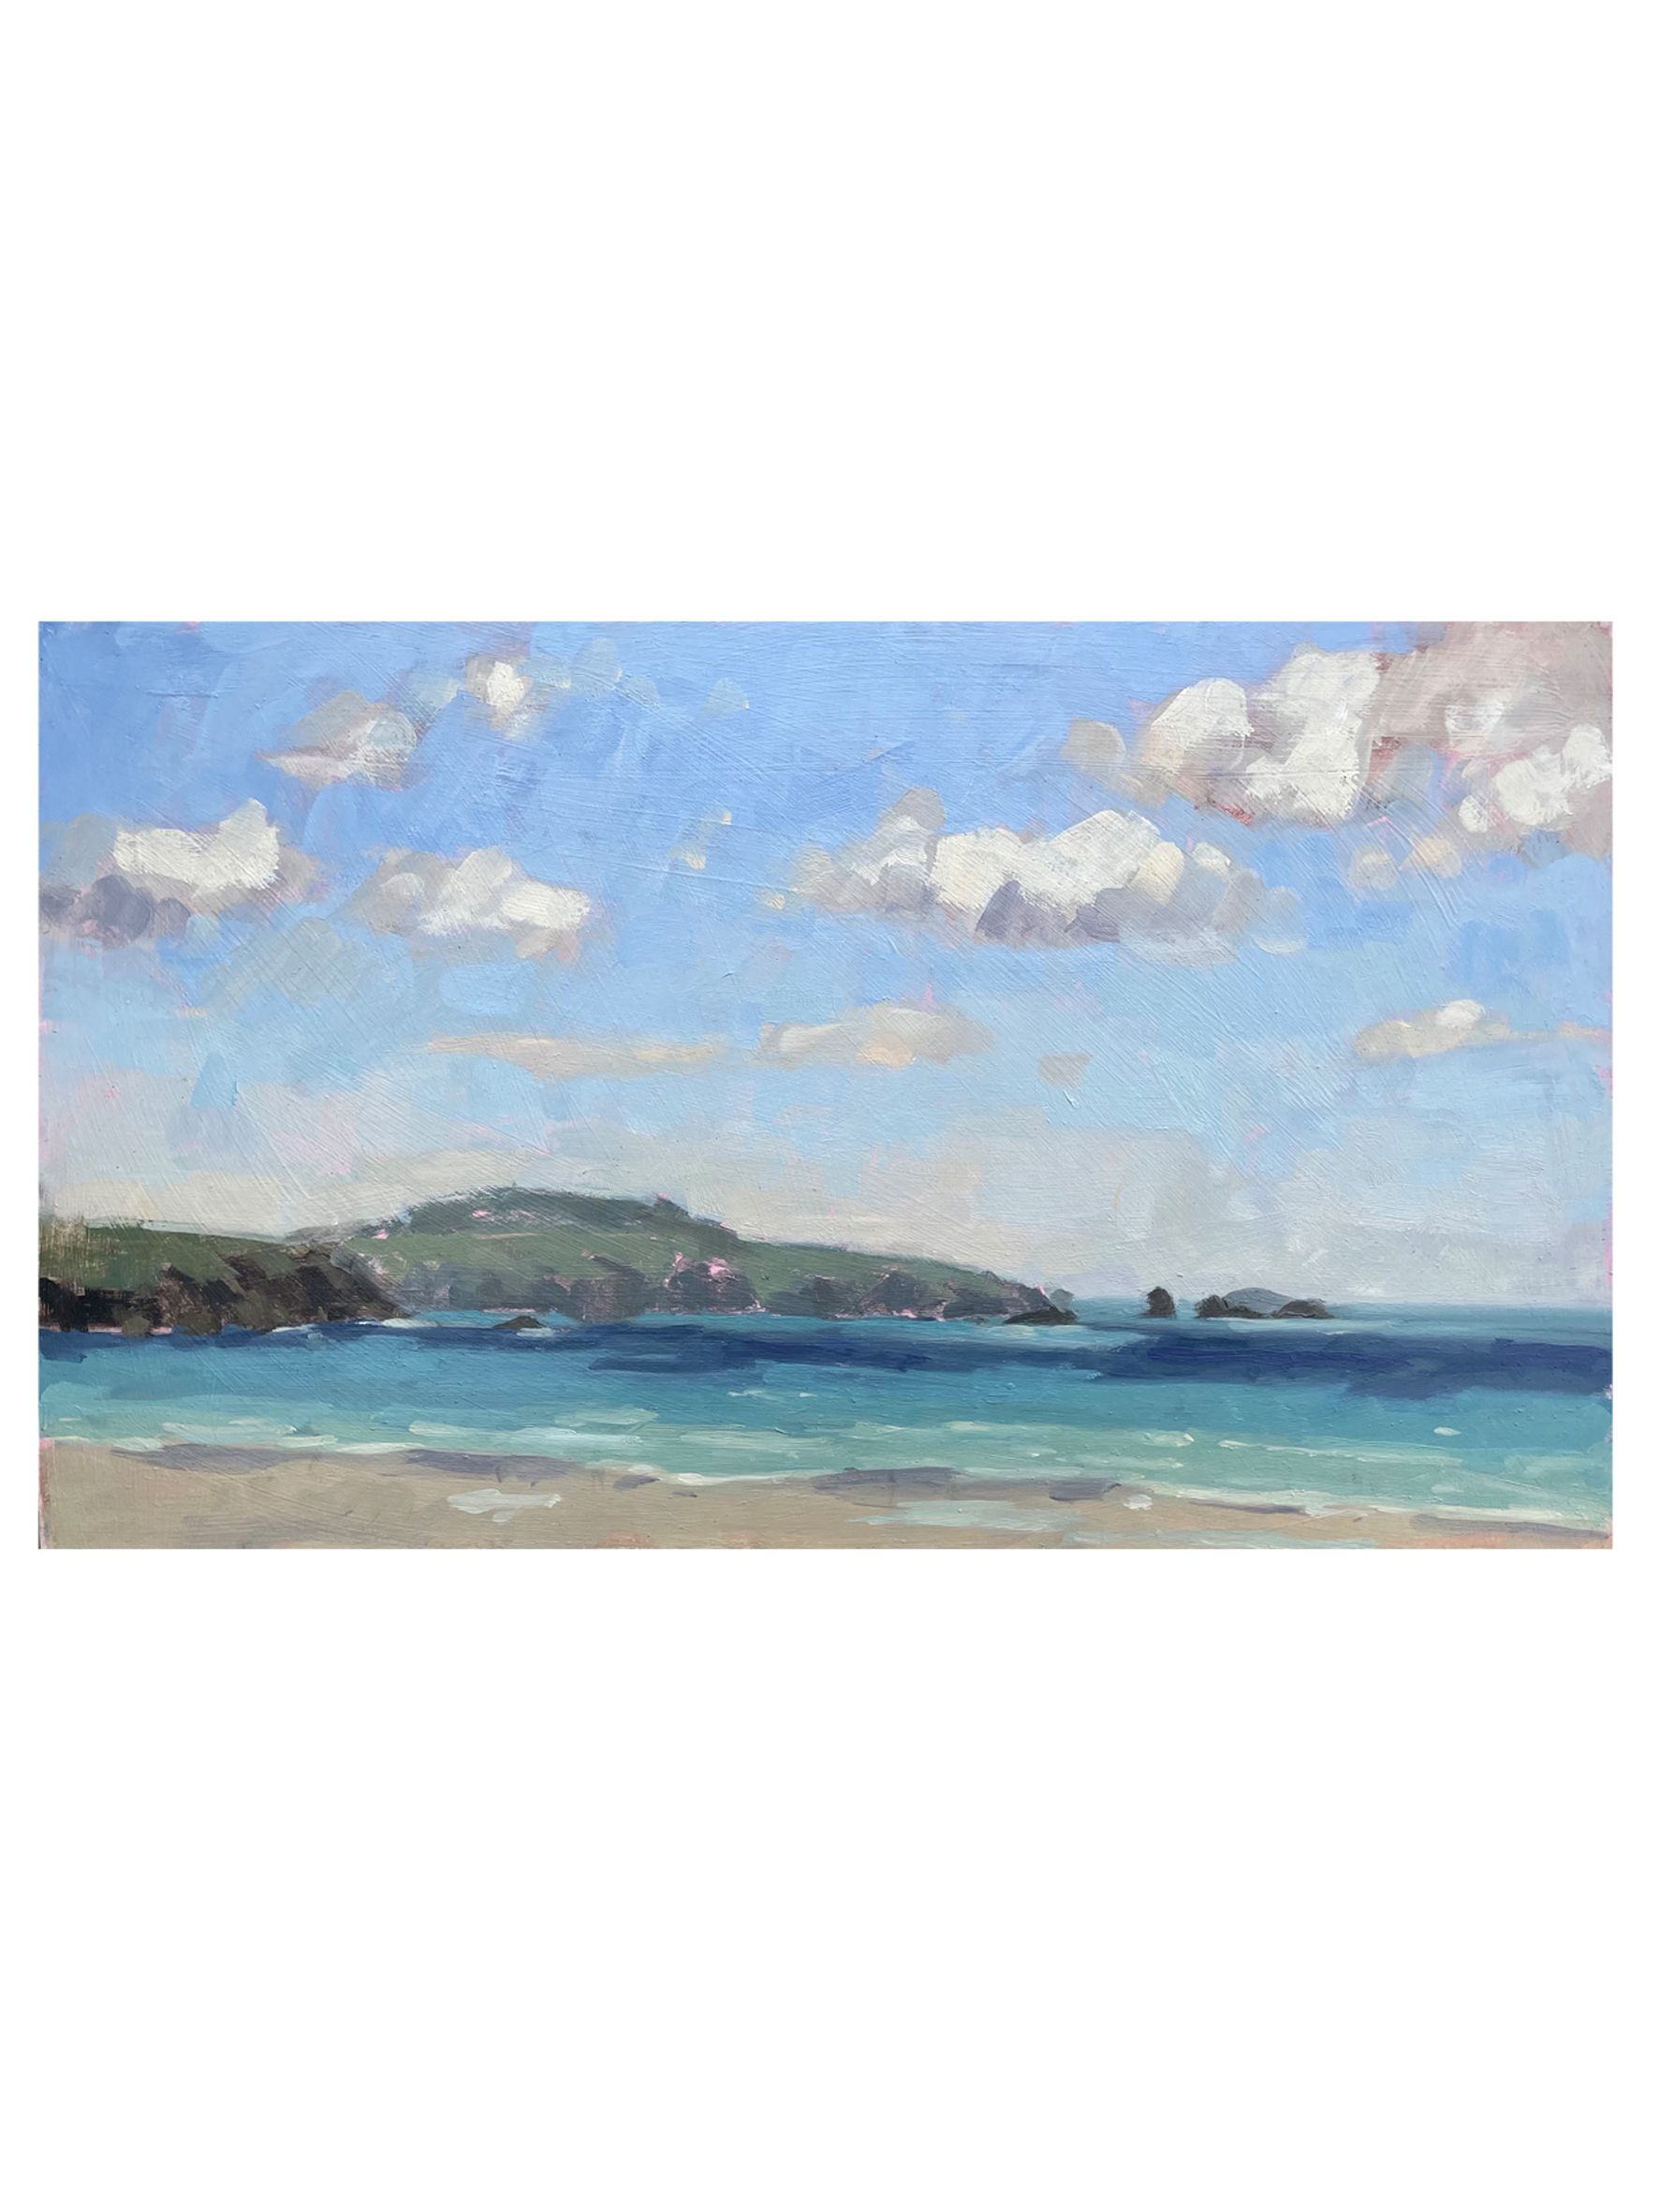 Summer Day at Whitesands Bay by Fiona Carver